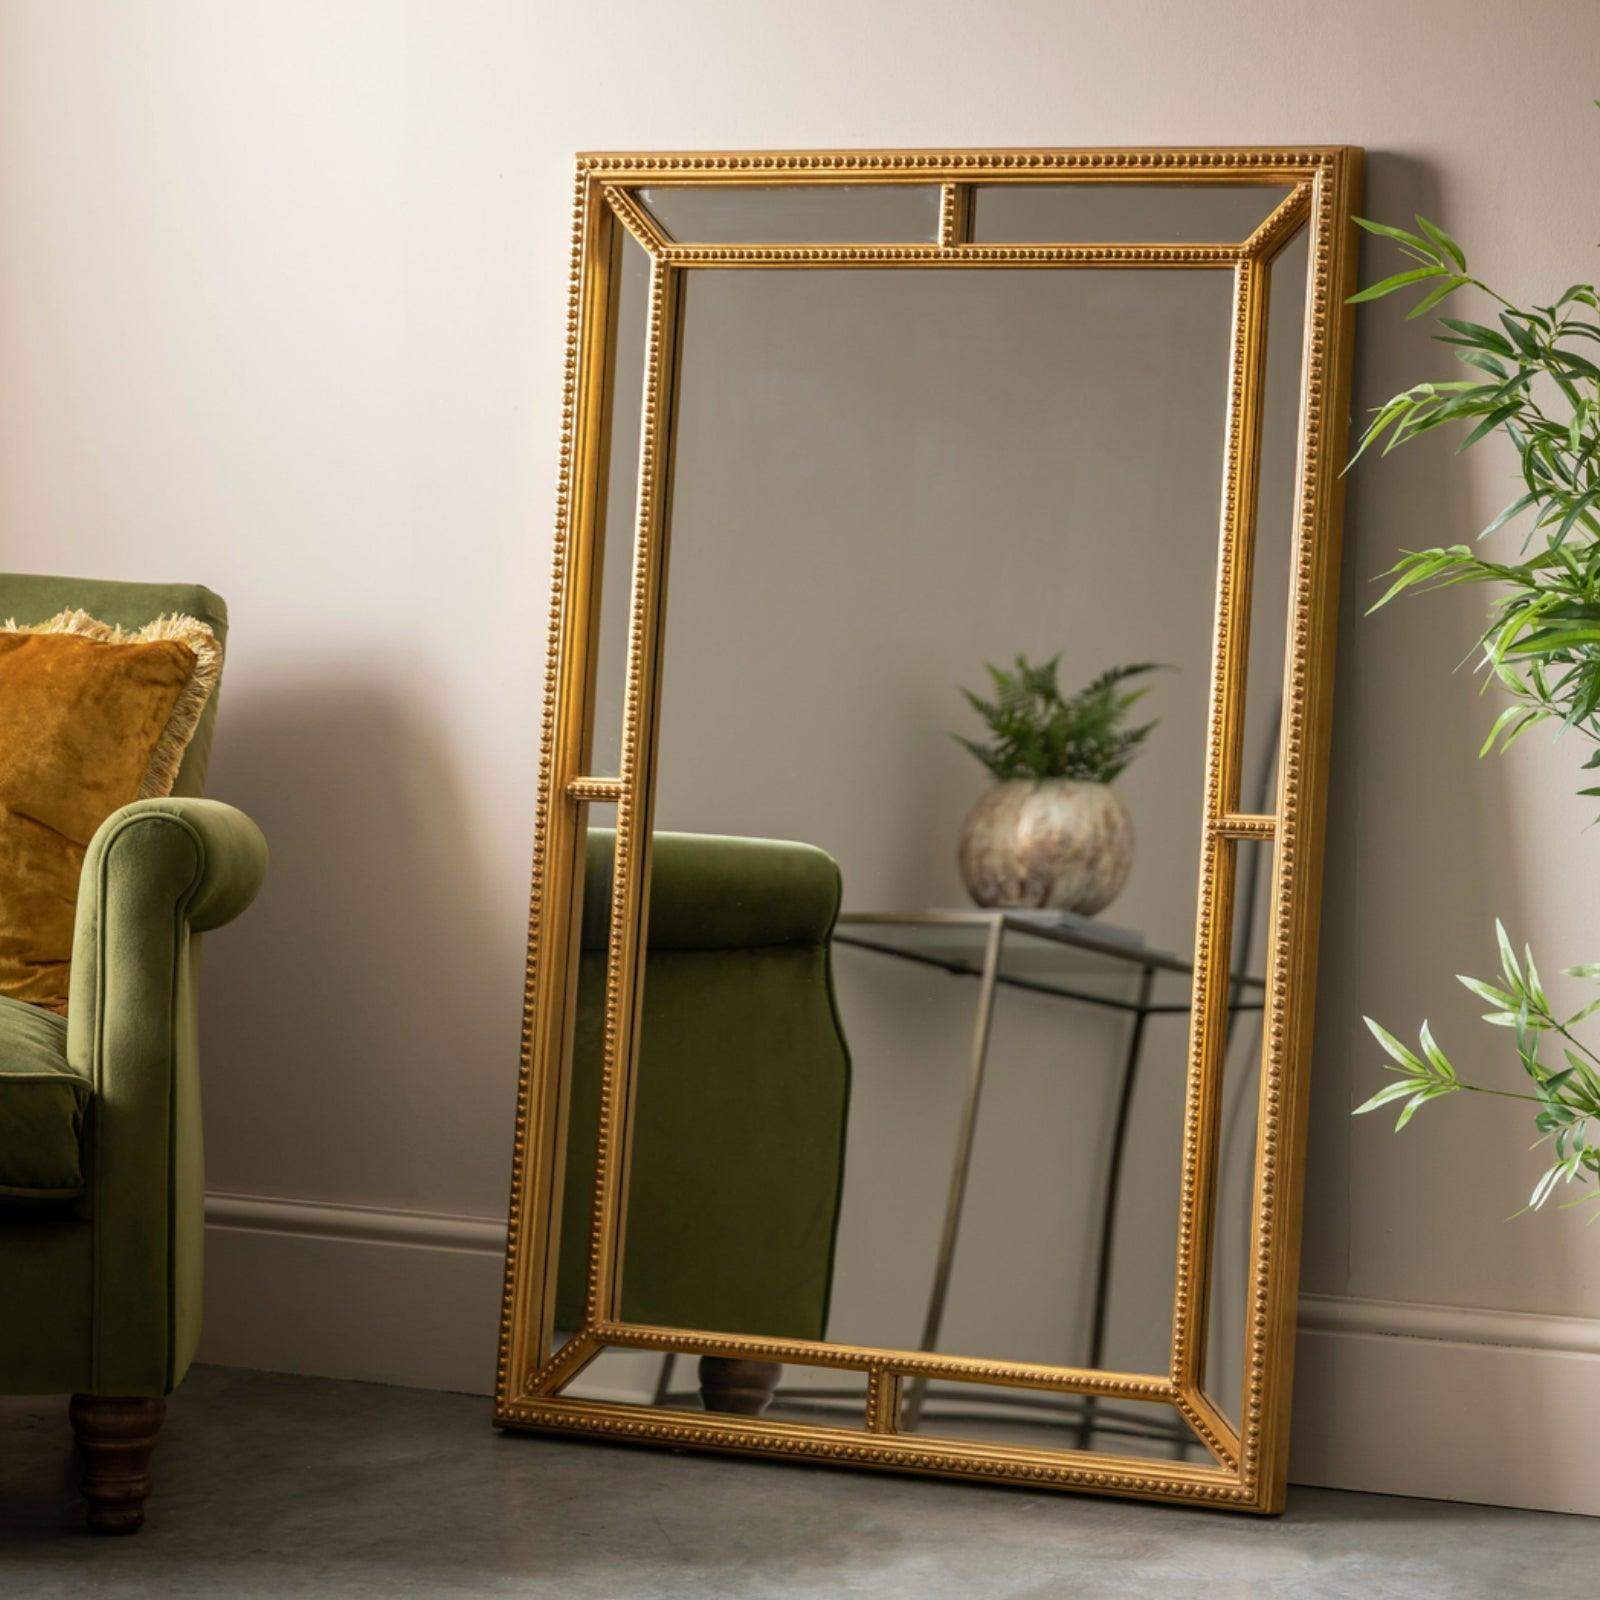 Beaded Rectangular Wall Mirror with Antique Gold Leaf Frame - The Farthing